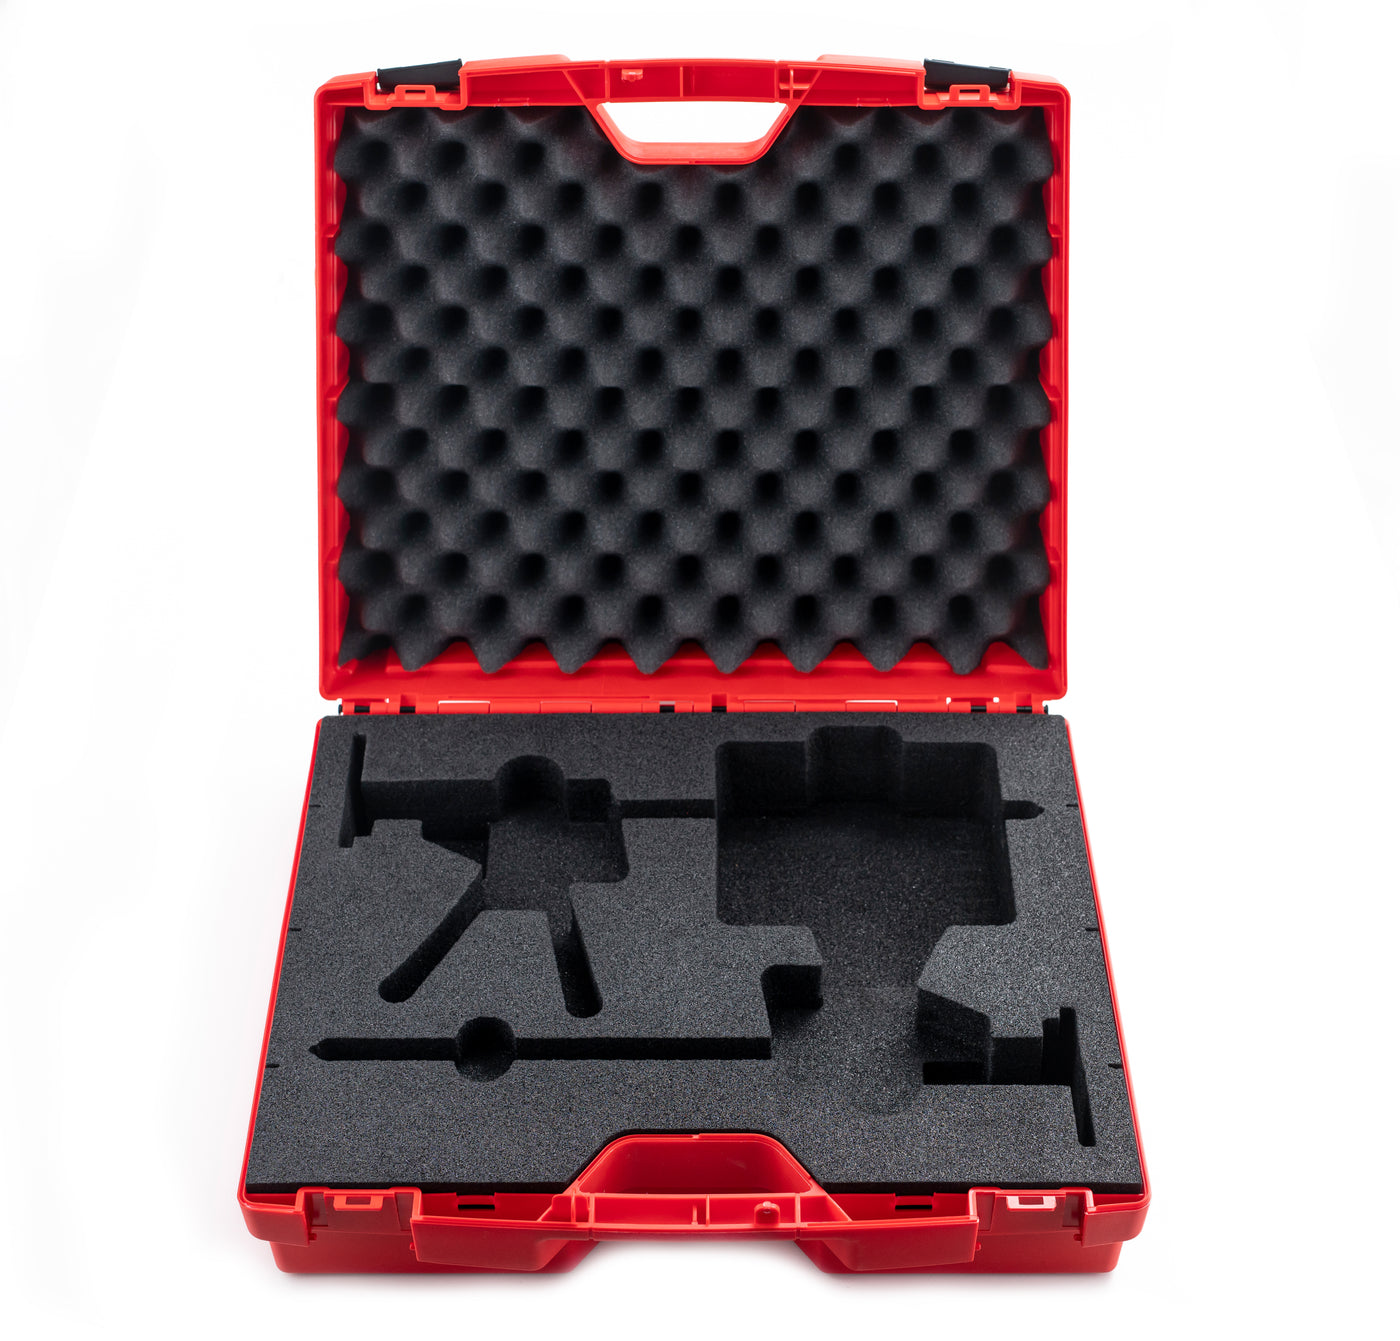 Storage Case For 2 Viking Arms®  (Option A )